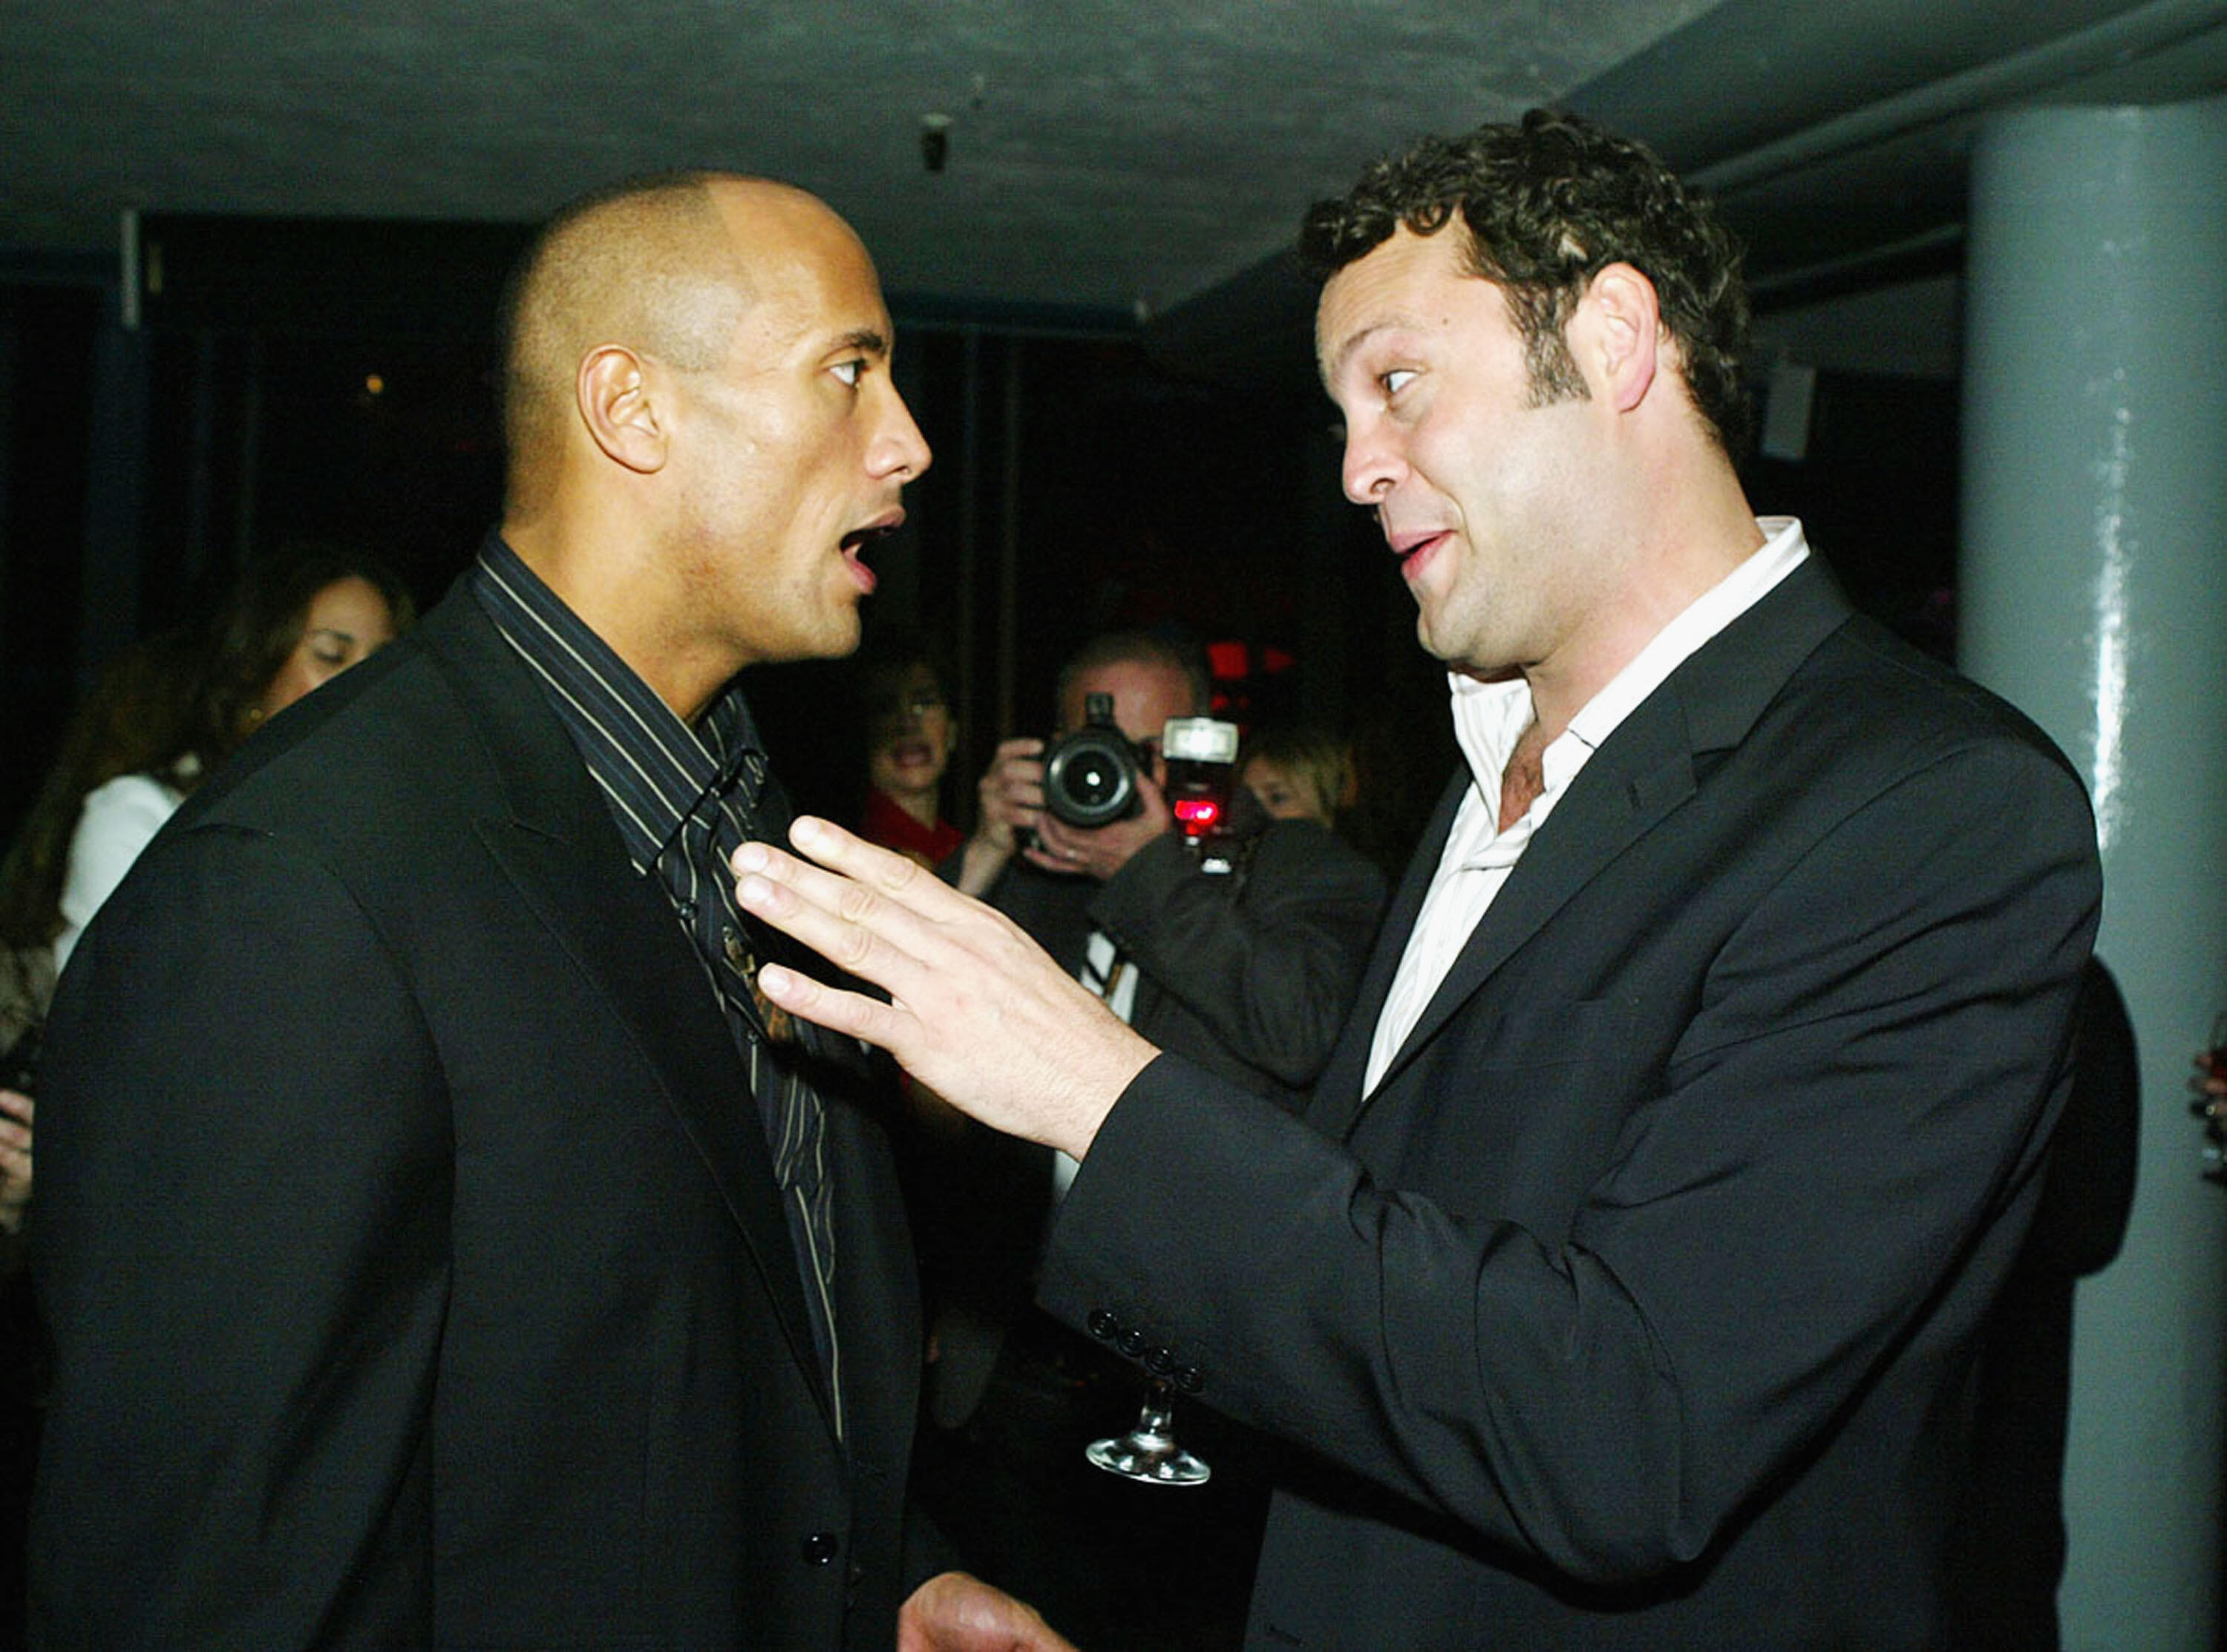 LOS ANGELES - FEBRUARY 14:  Actors Dwayne 'The Rock' Johnson(L) and Vince Vaughn talk at the after party for the Premiere of MGM's 